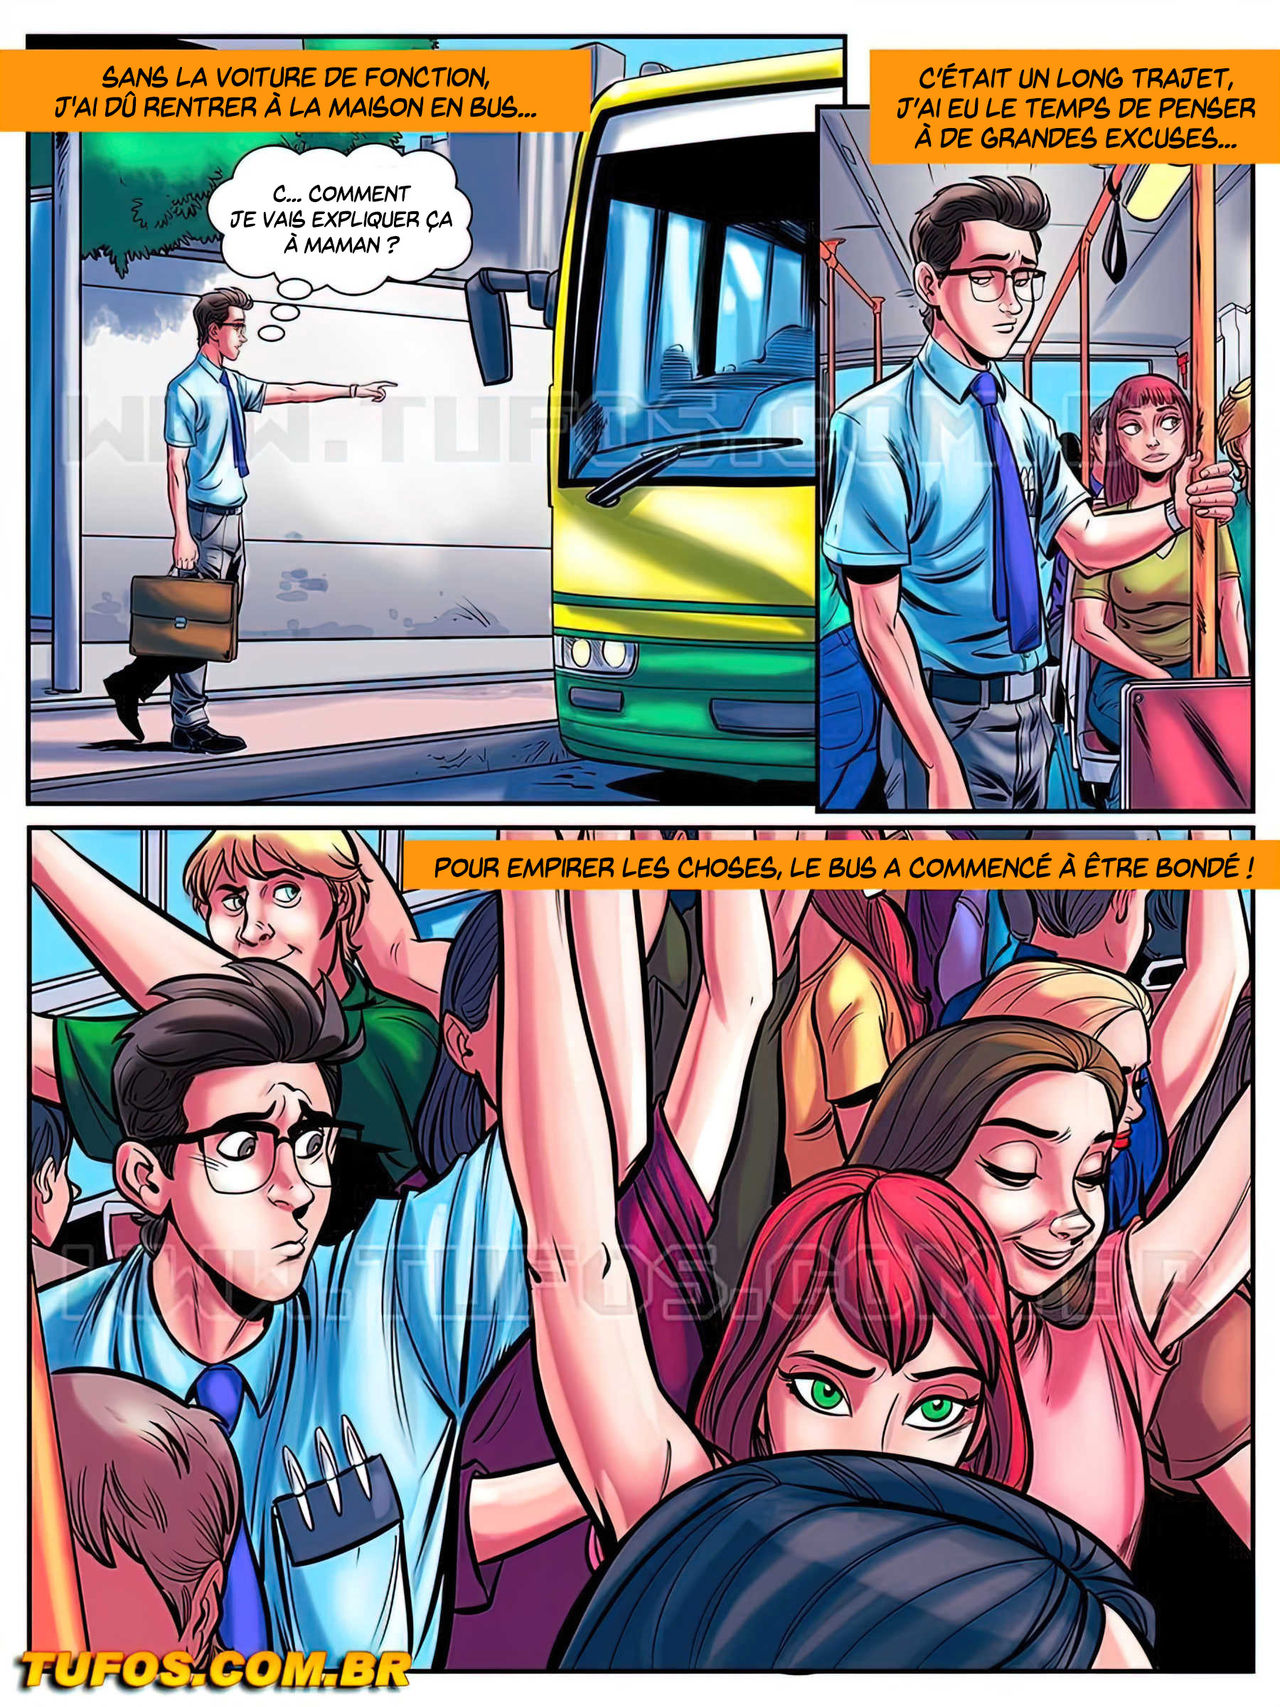 The Nerd Stallion 8 - Dry humping on the crowded bus numero d'image 3